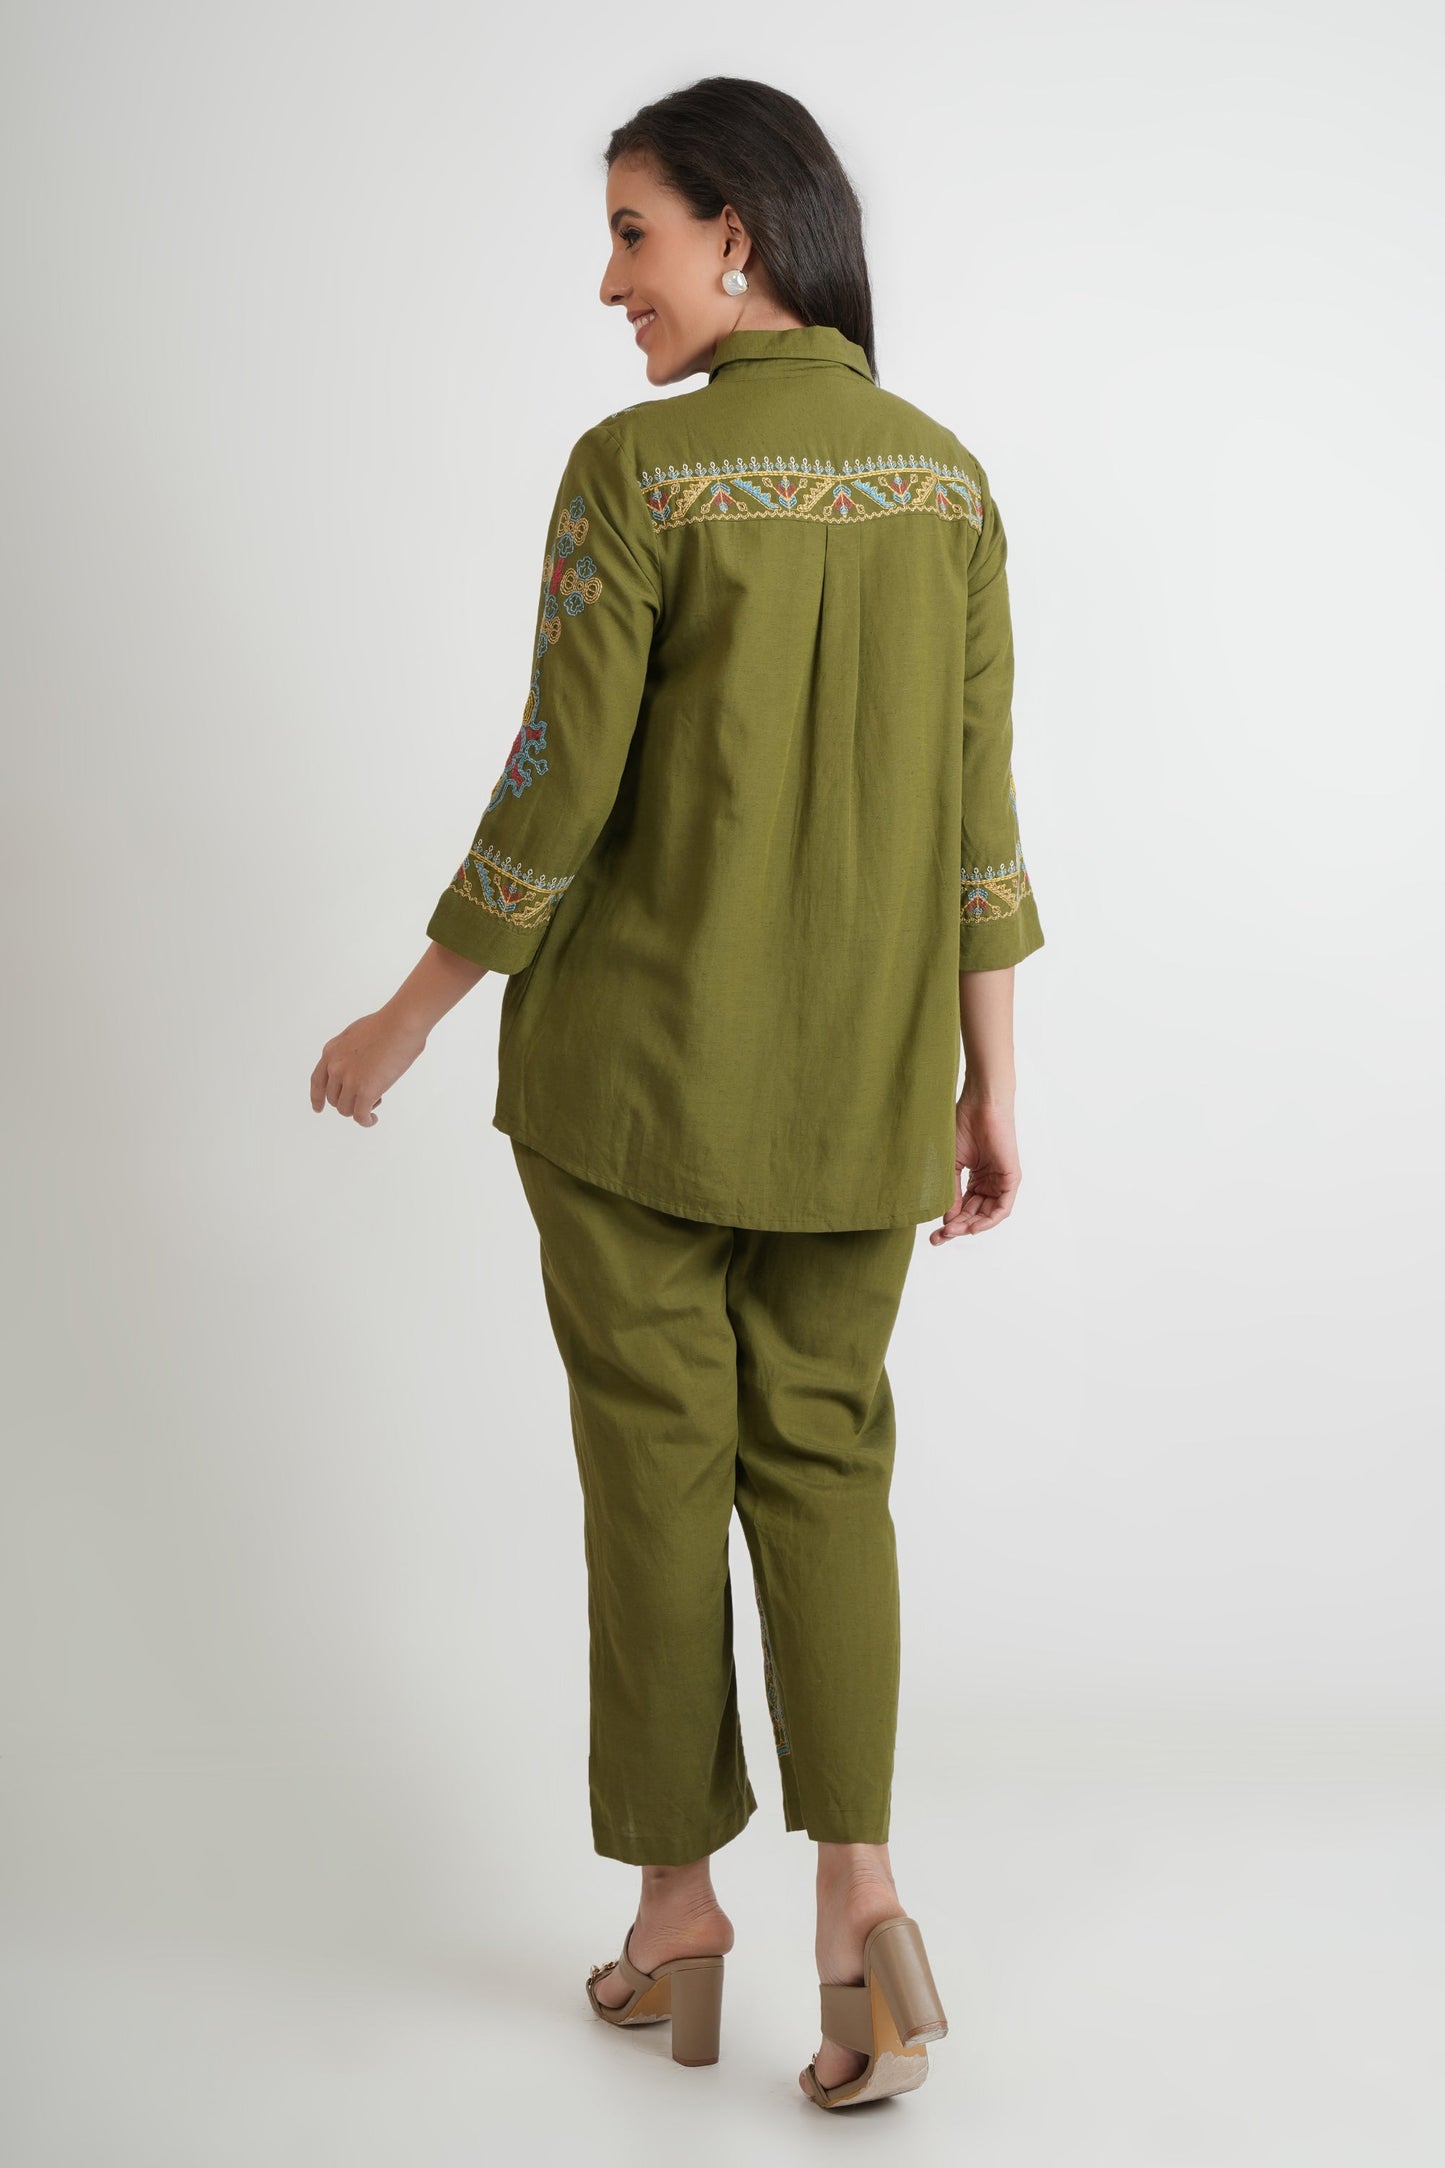 Green Embroidered Shirt and Pants - Co-ord Set - Dresses - APANAKAH